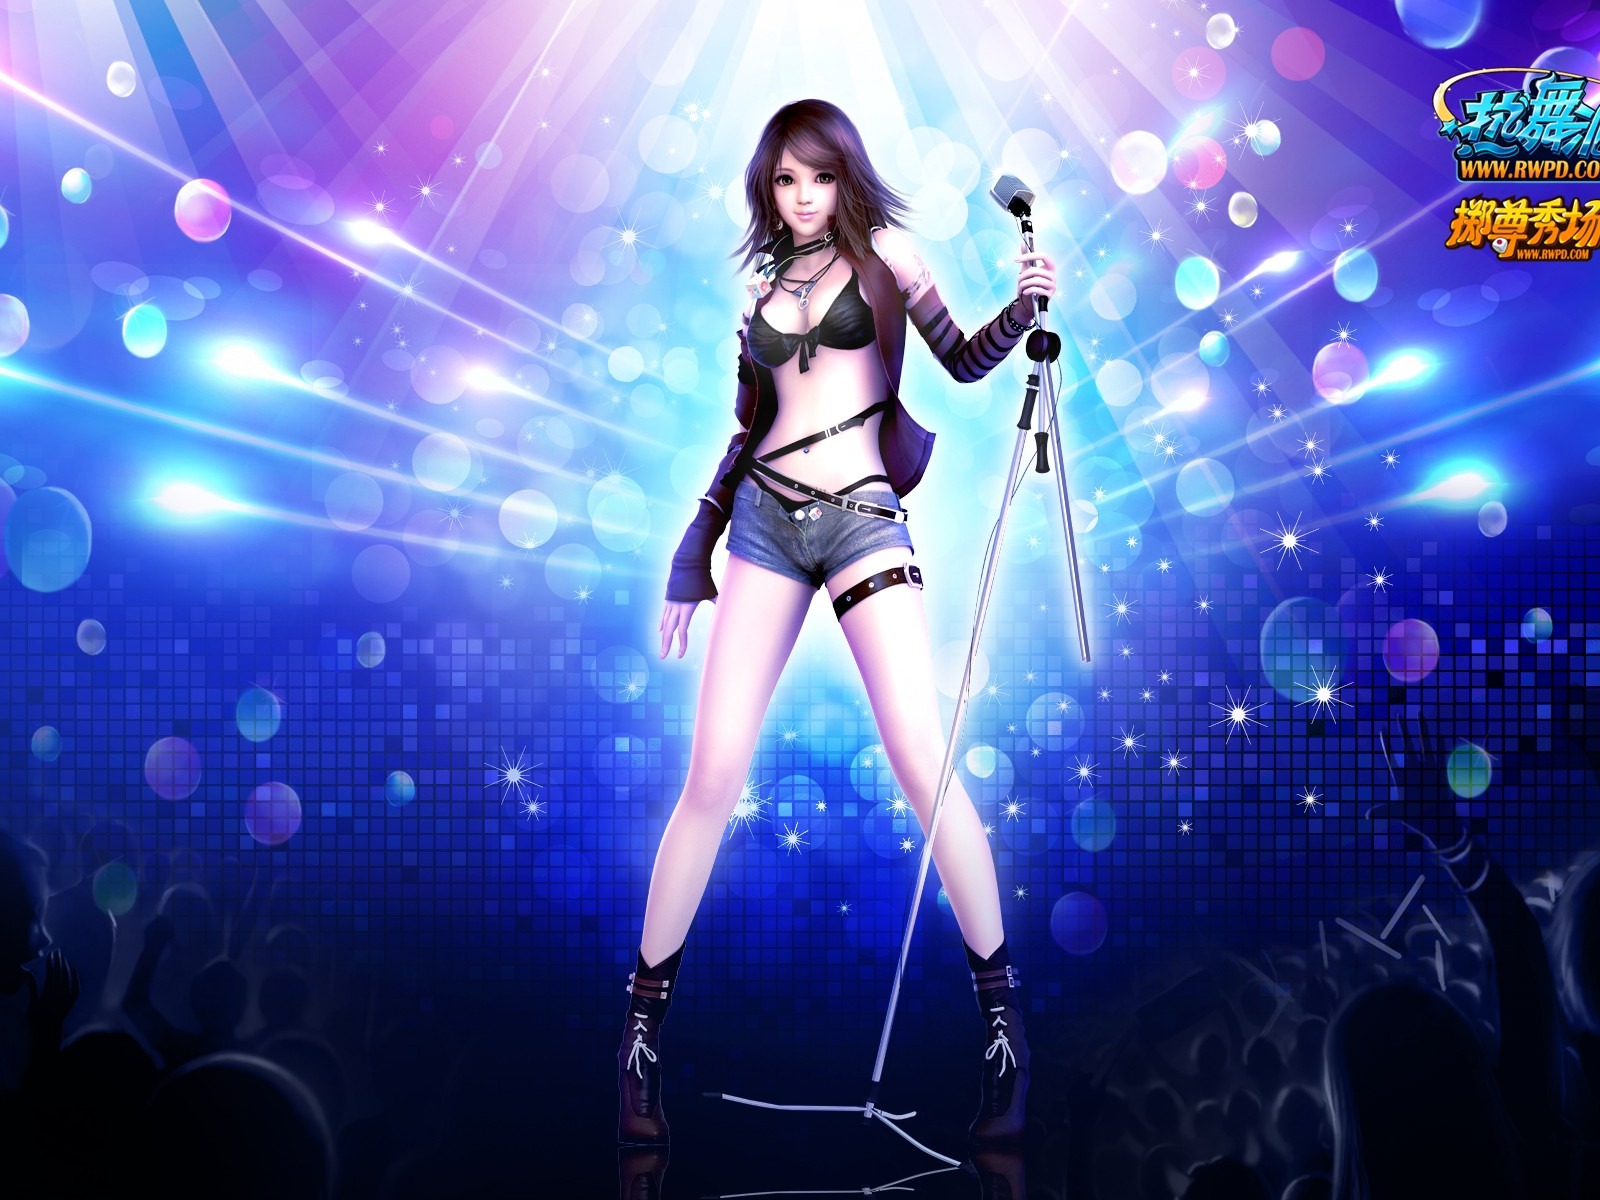 Online game Hot Dance Party II official wallpapers #39 - 1600x1200